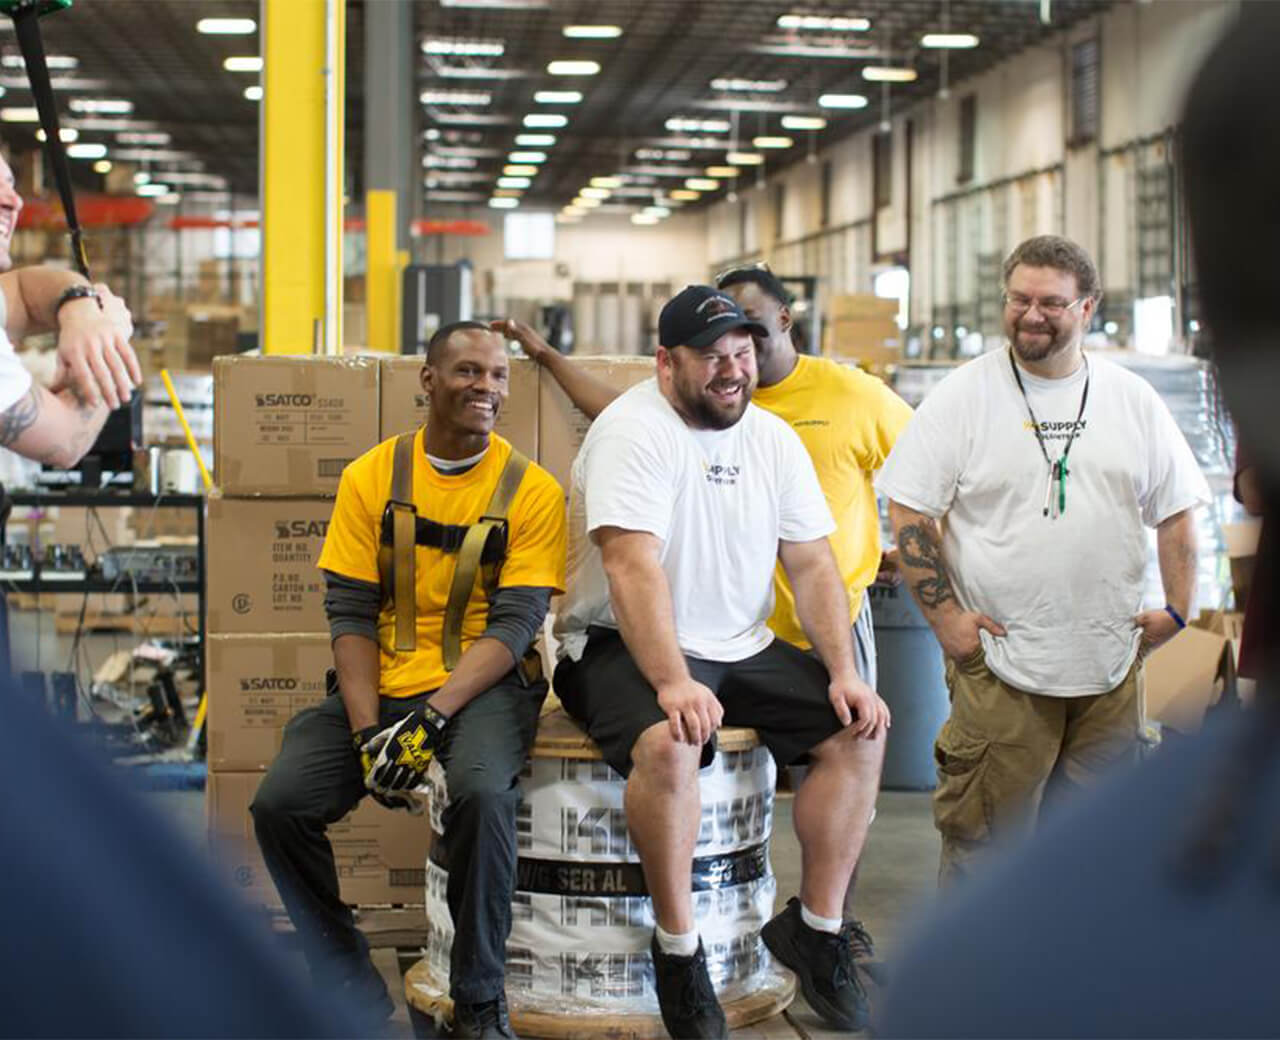 A group of HD Supply employees laughing and smiling in a warehouse setting